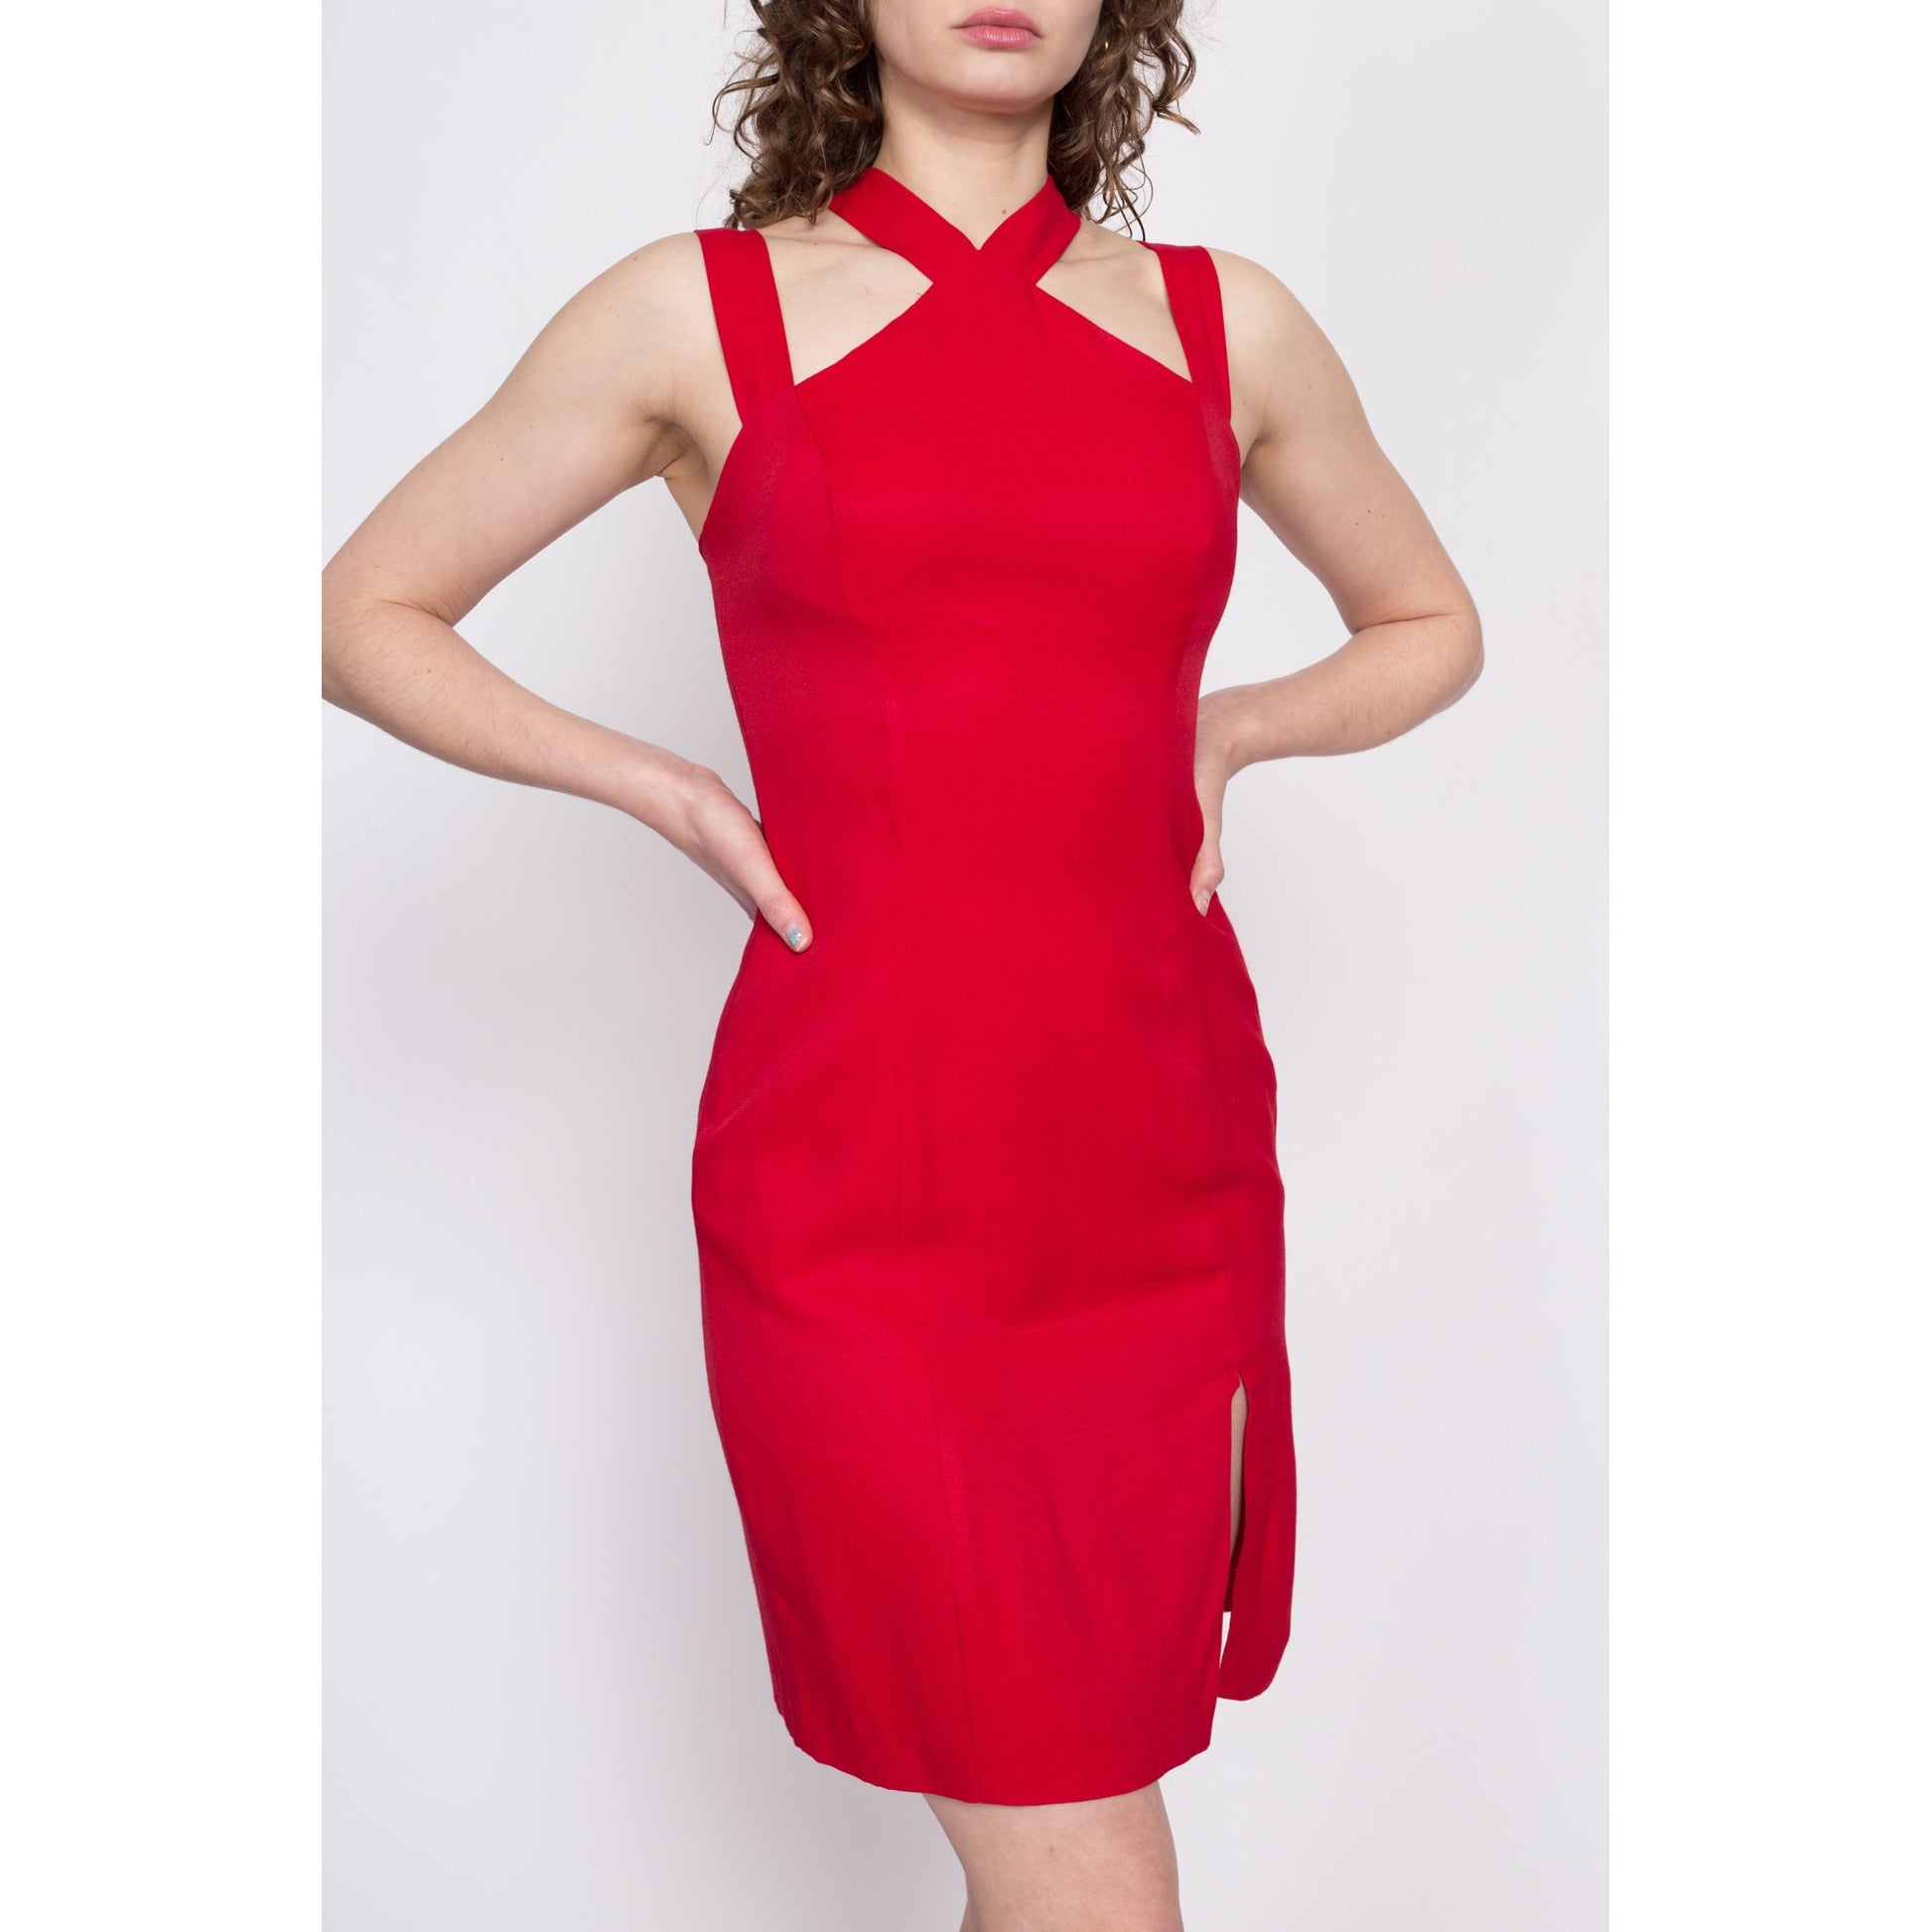 90s Red Strappy Cross Back Mini Dress - Small | Vintage Thigh Slit Fitted Party Dress